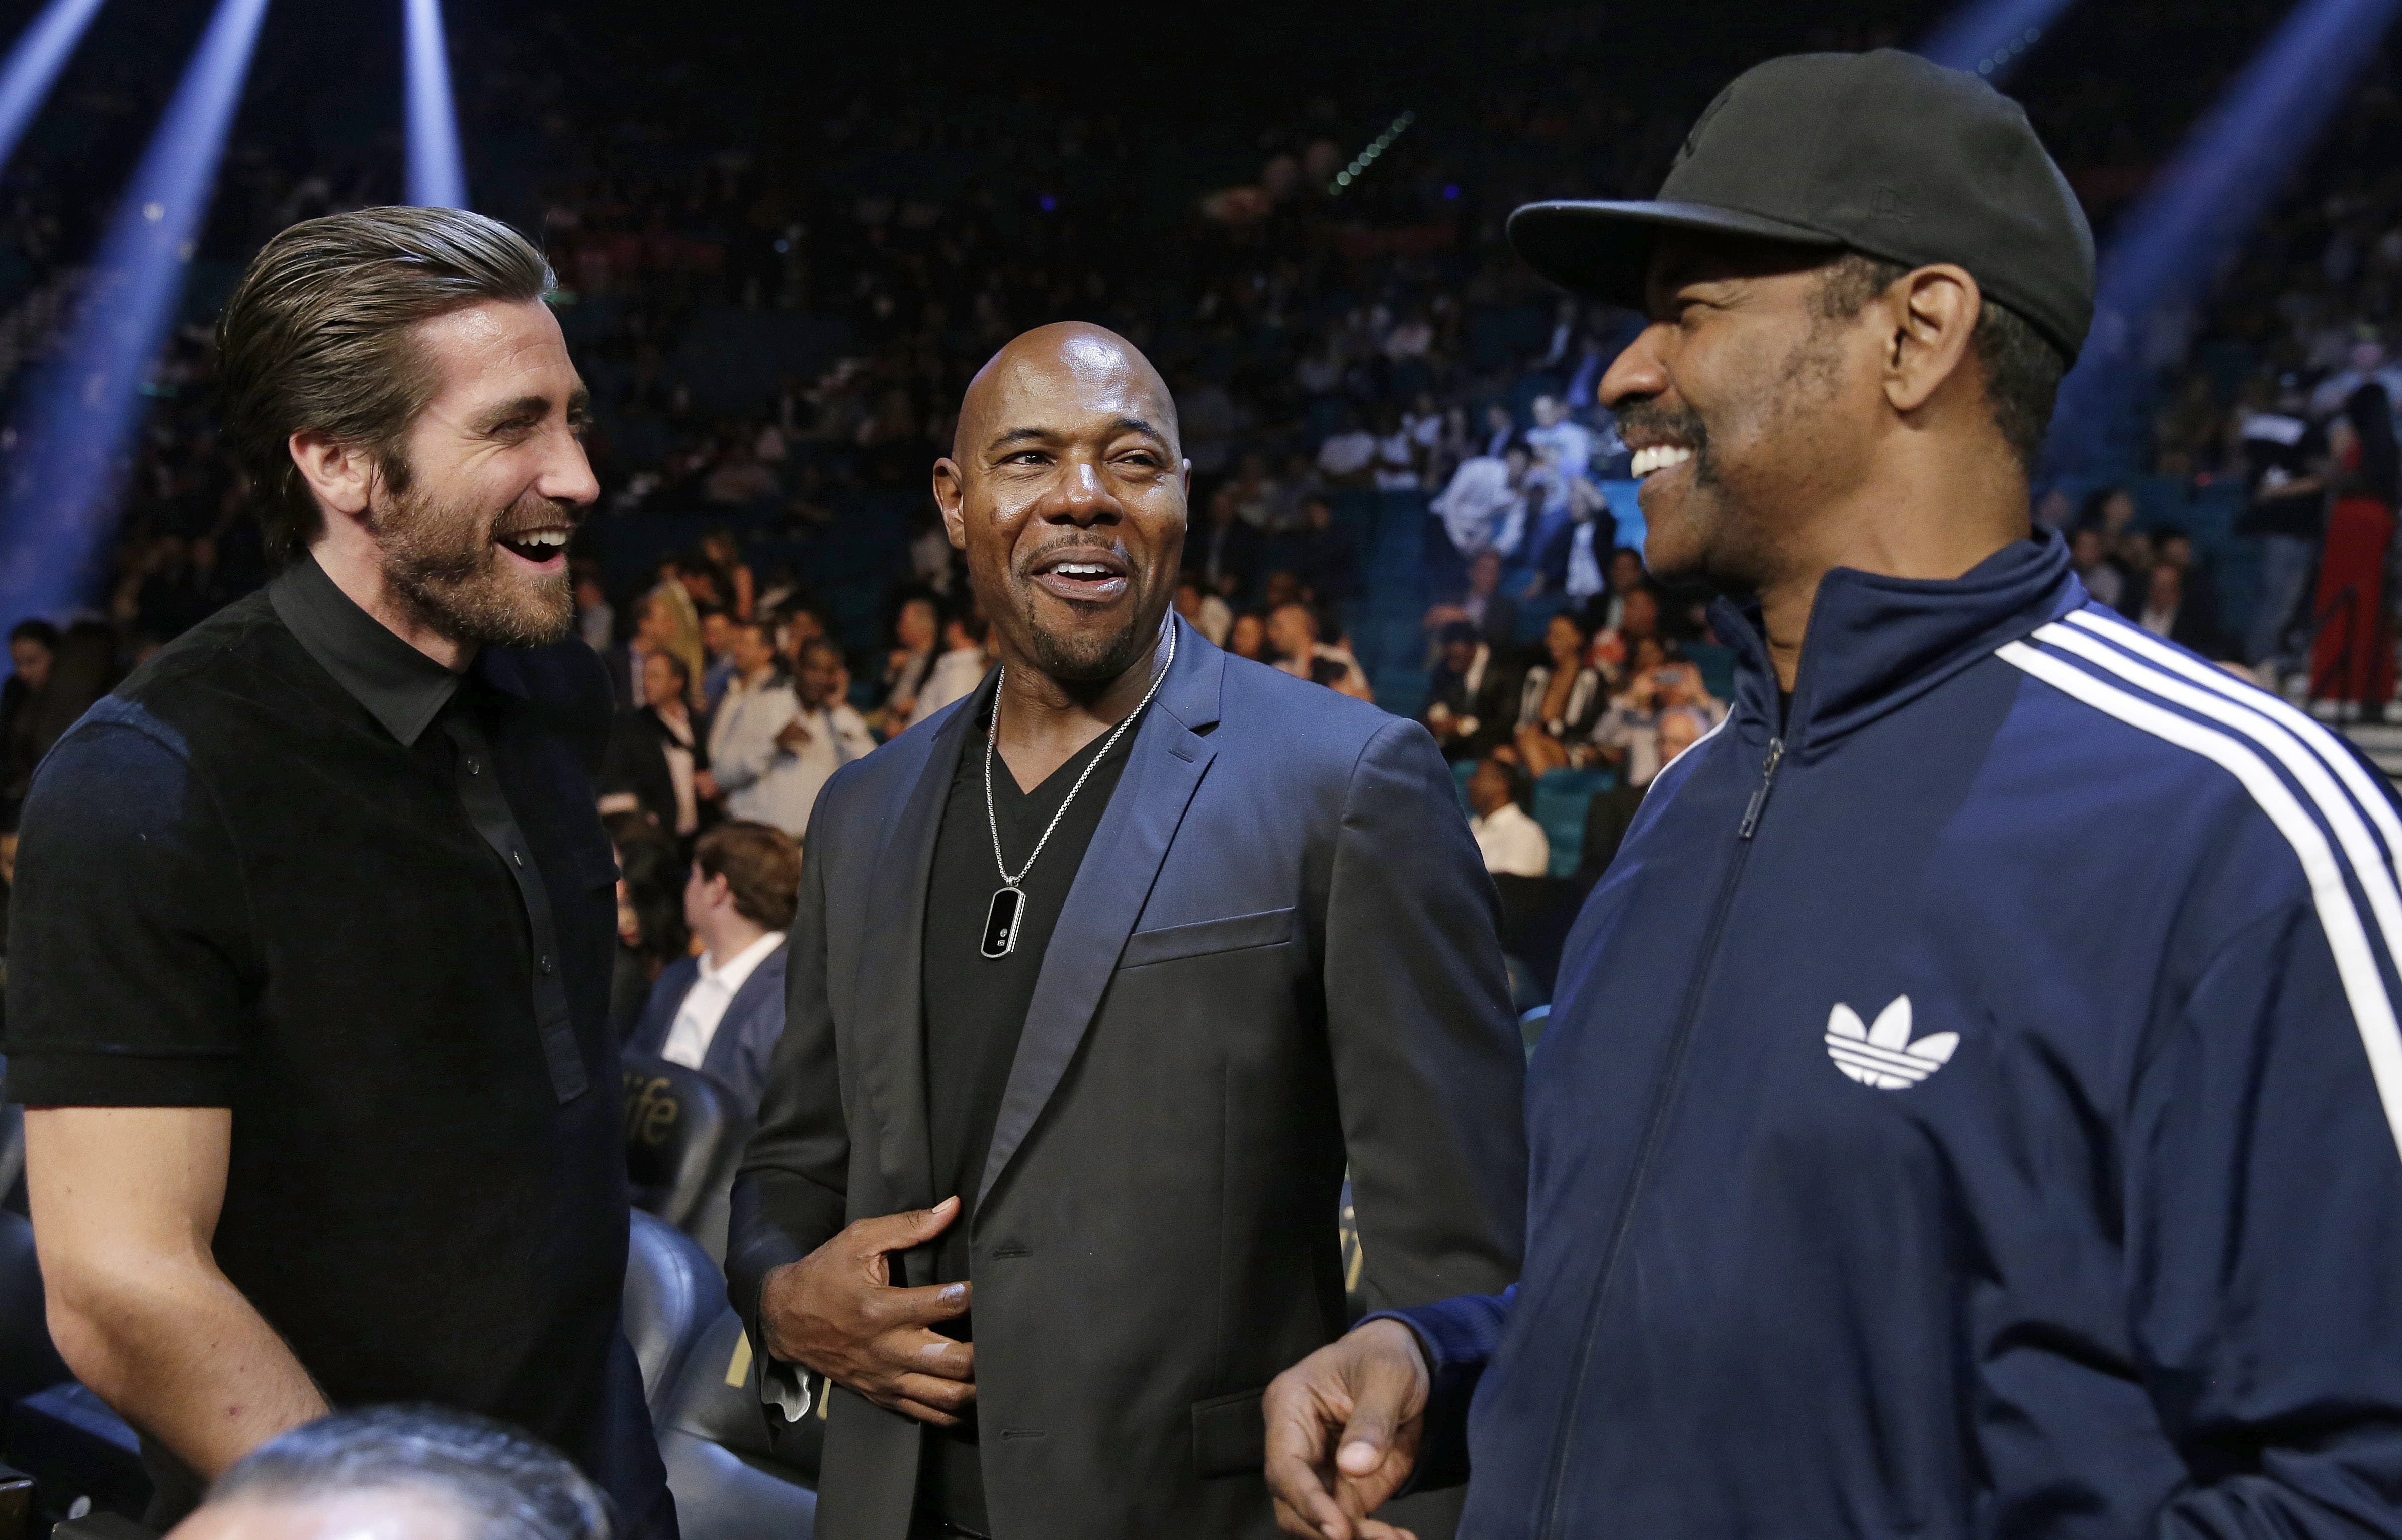 Actor Jake Gyllenhaal, left, is joined by director Antoine Fuqua and actor Denzel Washington before the start of the world welterweight championship. (AP)